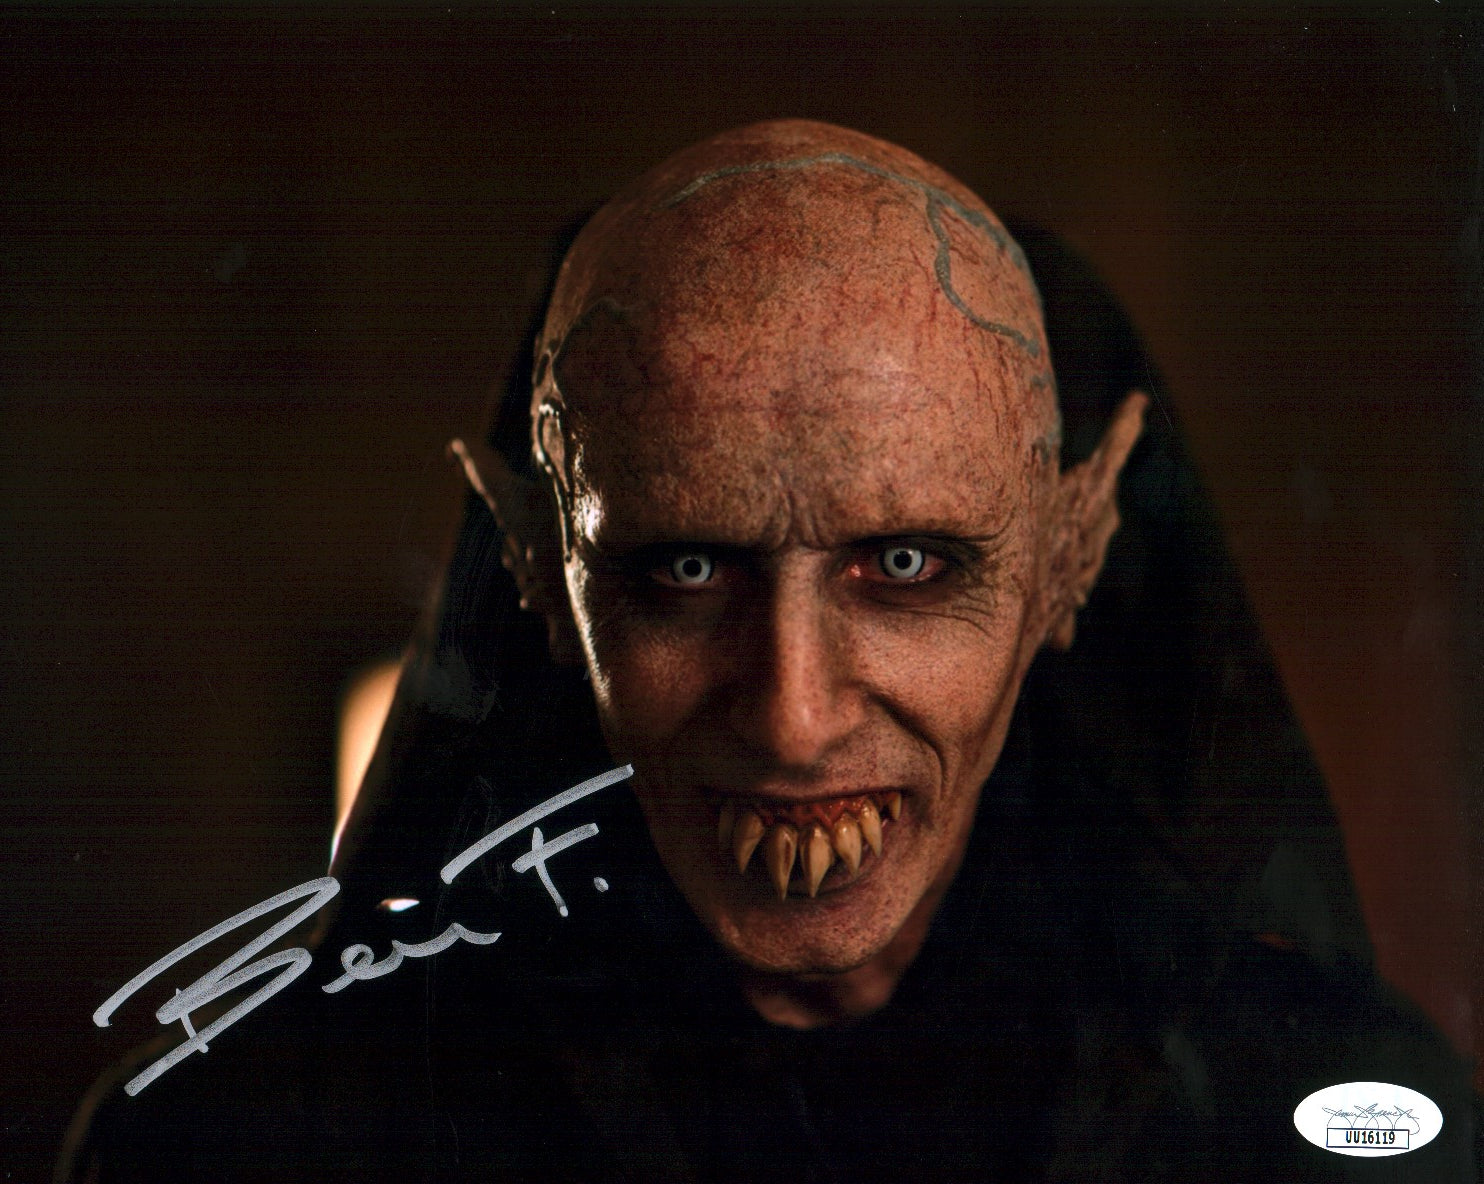 Benjamin Fransham What We Do In The Shadows 8x10 Photo Signed Autograph JSA Certified COA Auto